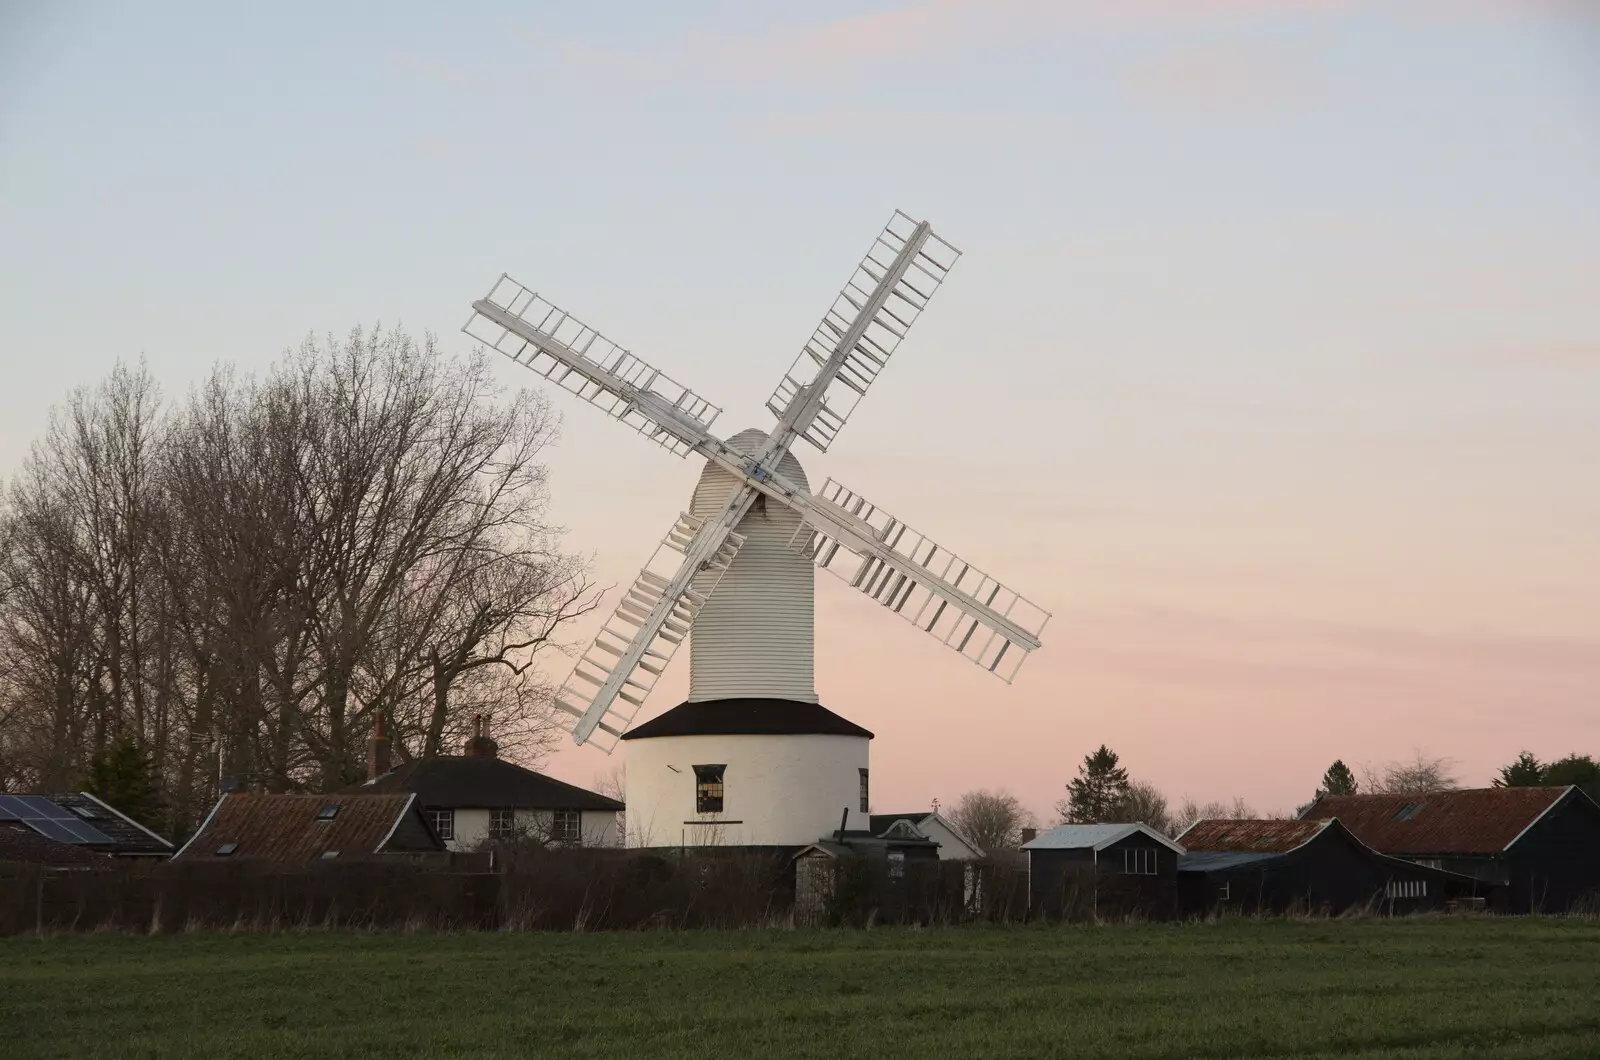 Saxtead Green Post Mill in the dusk, from A Trip to Orford Castle, Orford, Suffolk - 26th February 2022